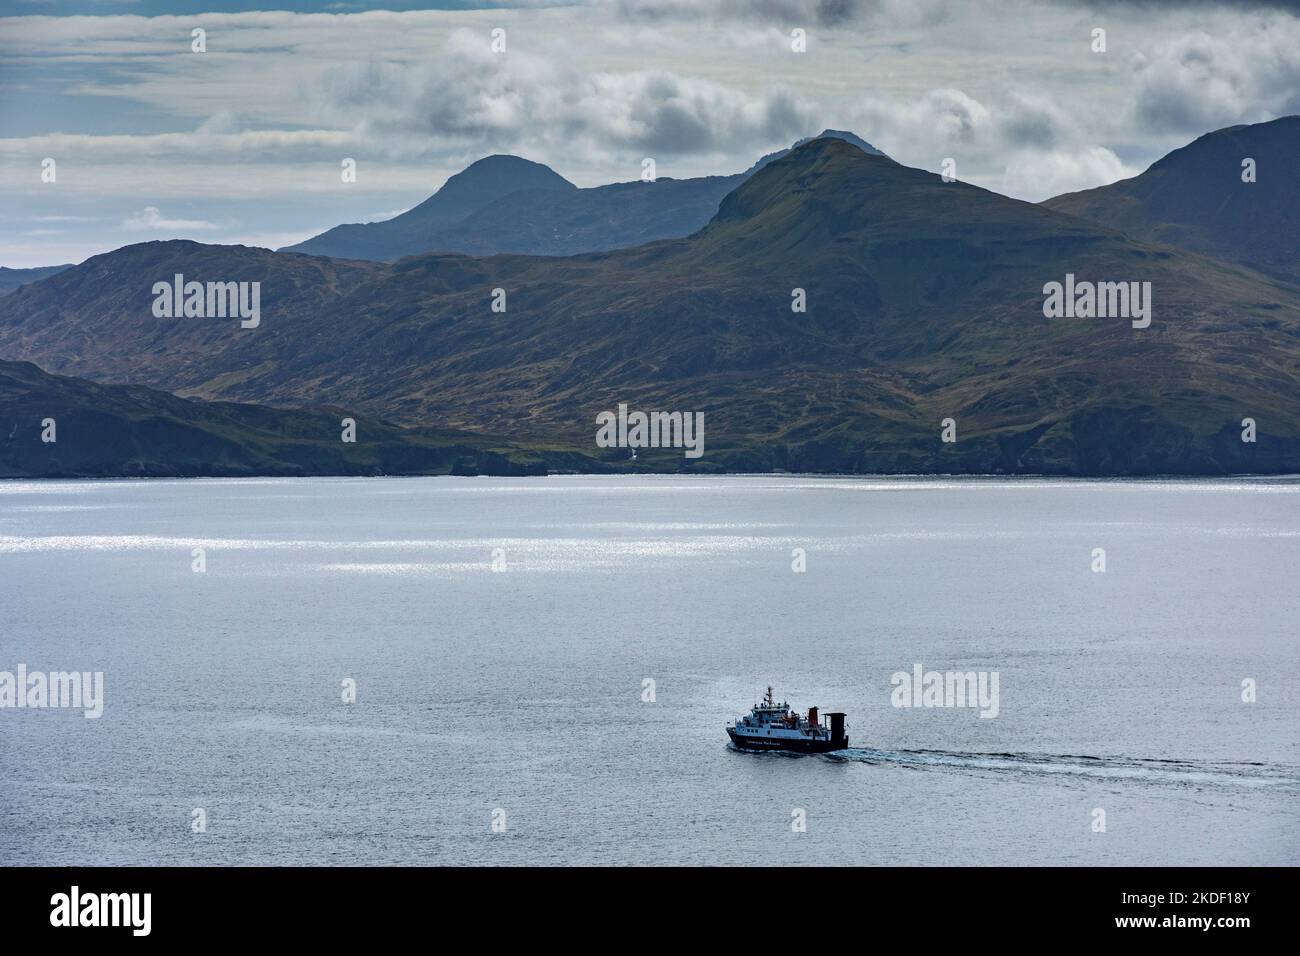 The Caledonian MacBrayne Small Isles ferry, the MV Lochnevis, leaving the harbour, Isle of Canna, Scotland, UK.  The mountains of Rum behind. Stock Photo